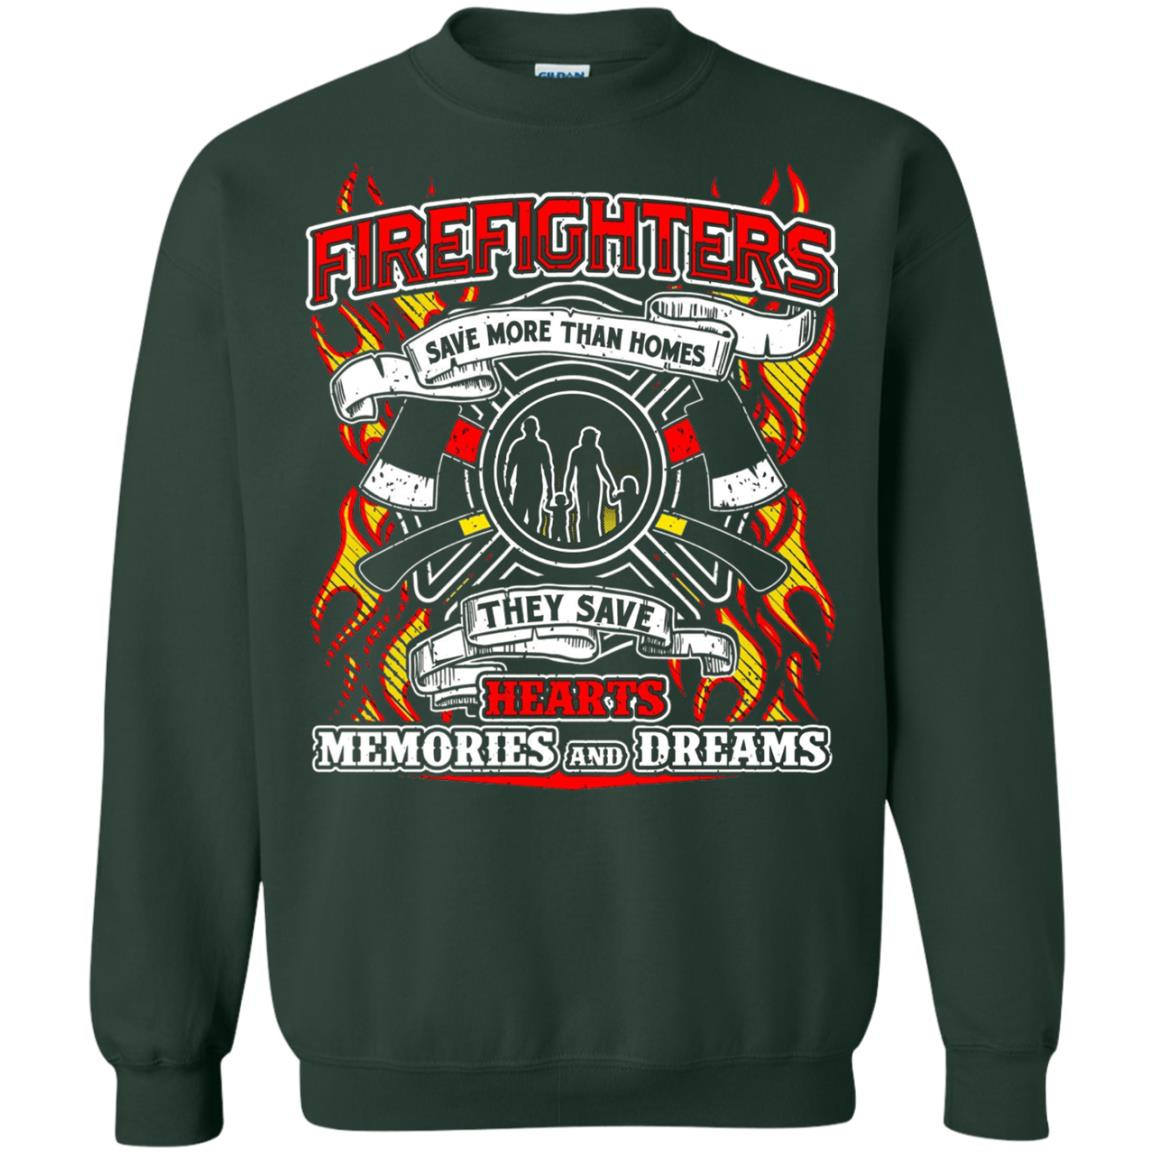 Inktee Store - Firefighters Save More Than Homes They Save Dreams Sweatshirt Image